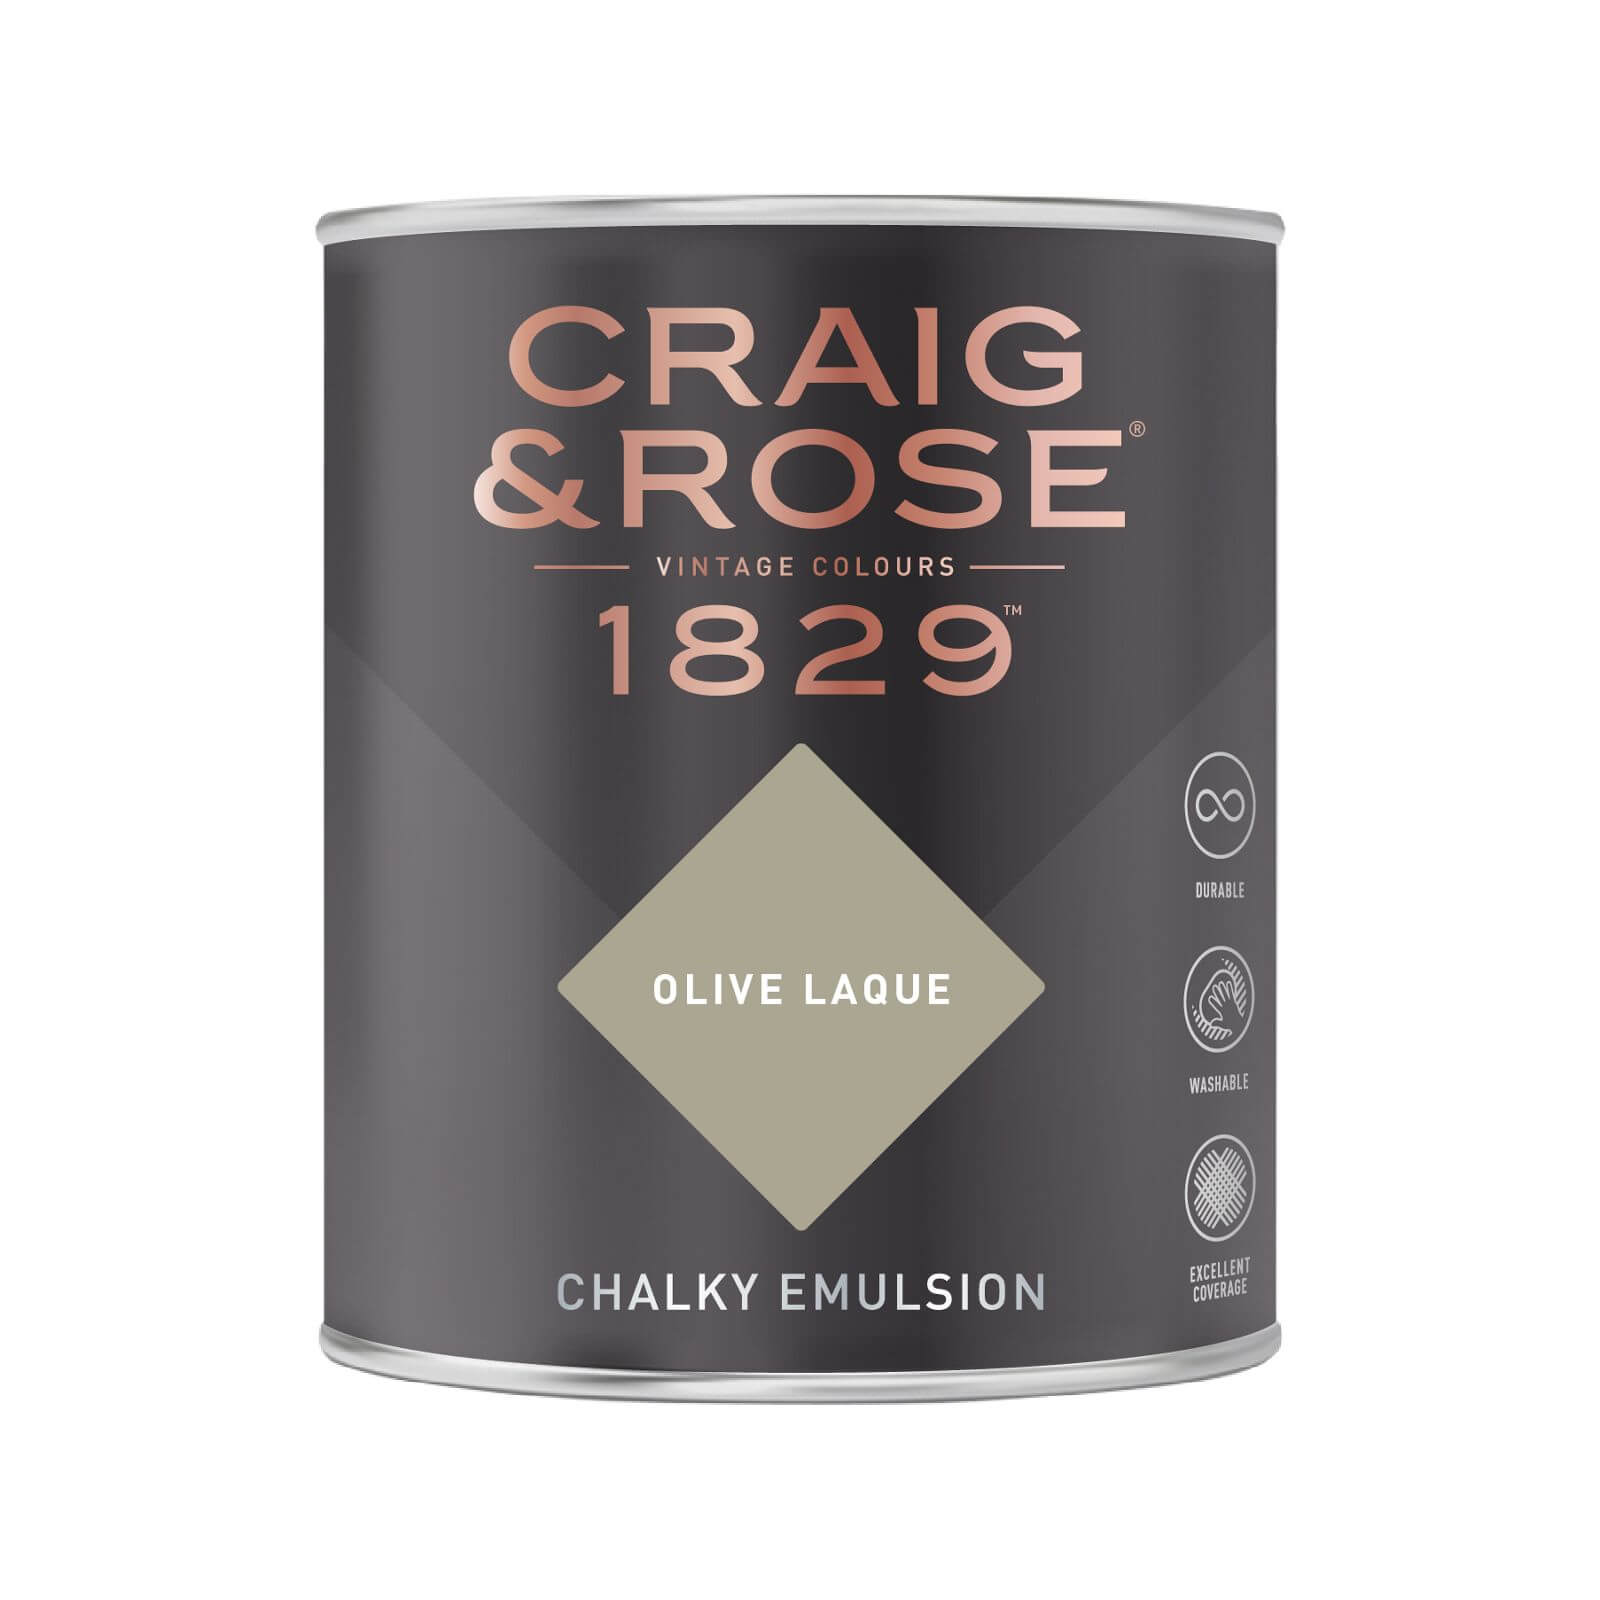 Craig & Rose 1829 Chalky Emulsion Paint Olive Laque - 750ml